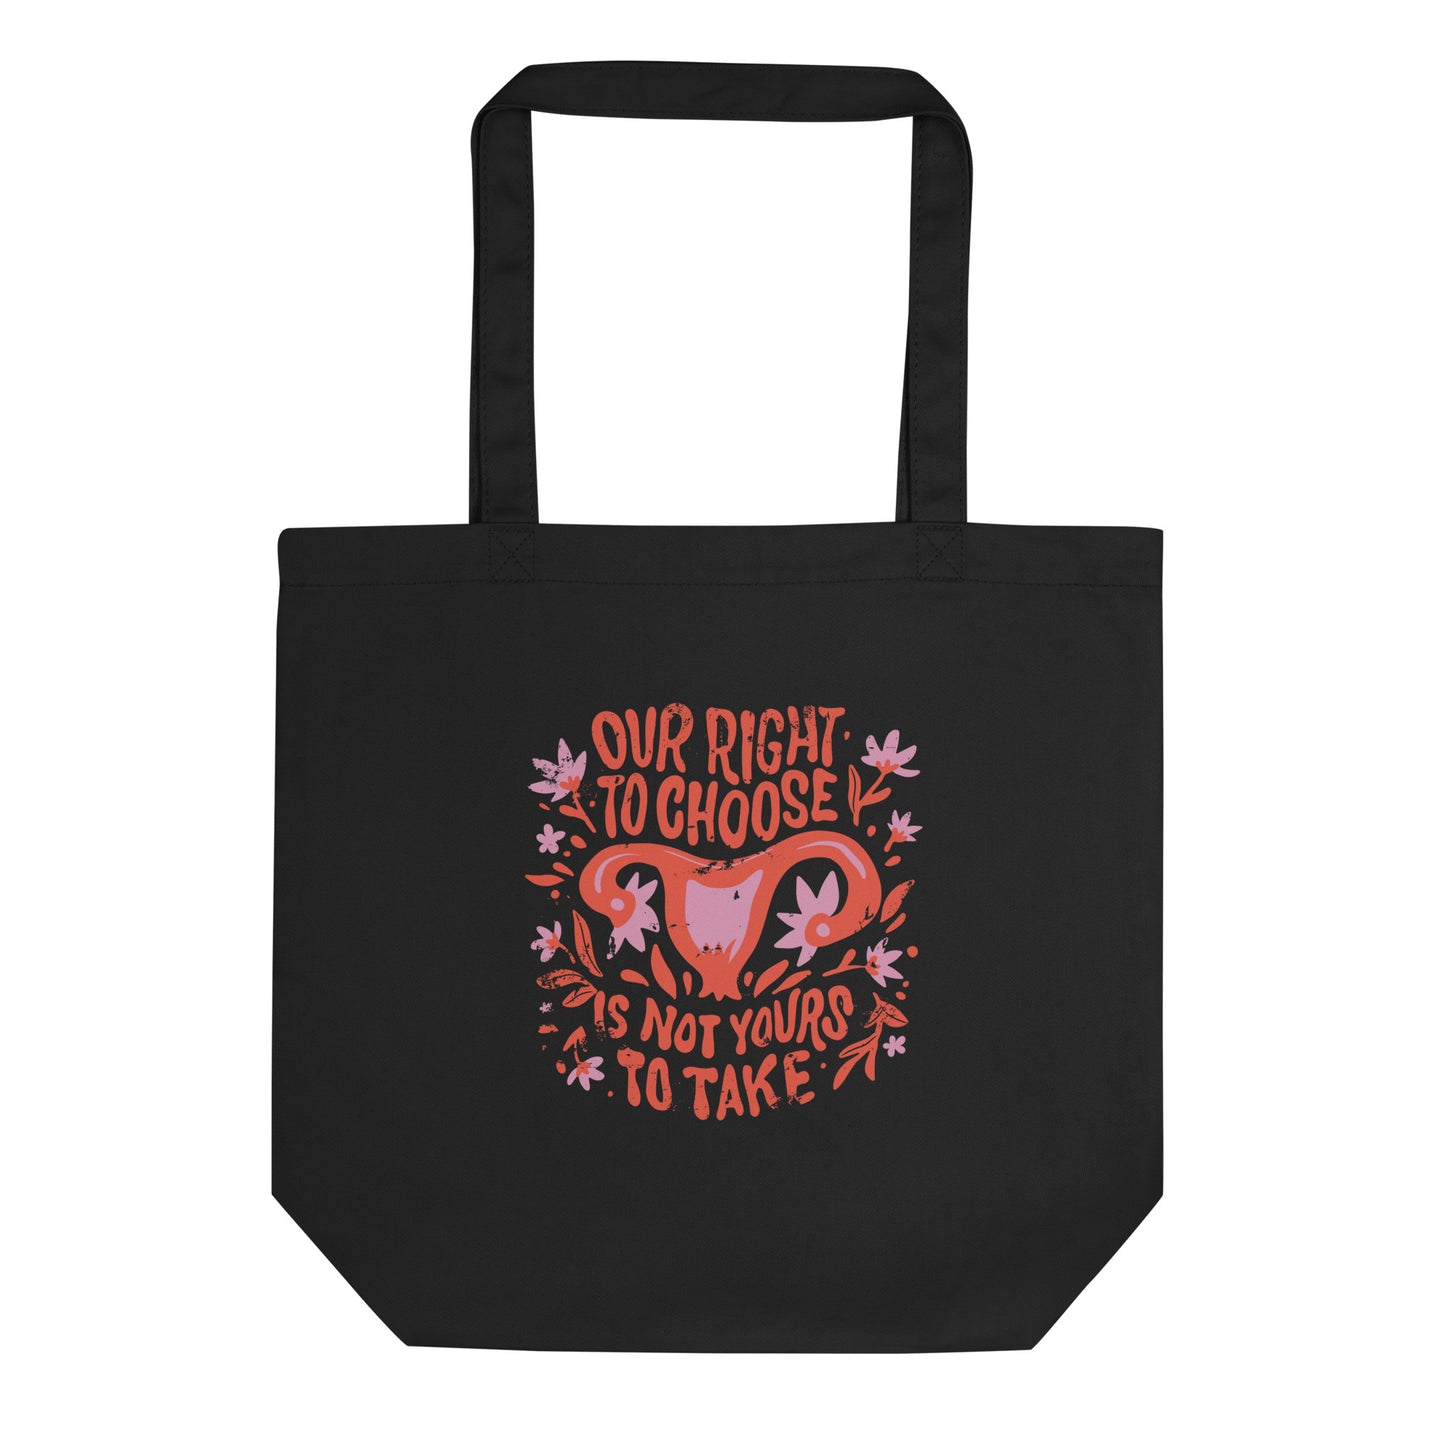 Our Right to Choose Tote Bag